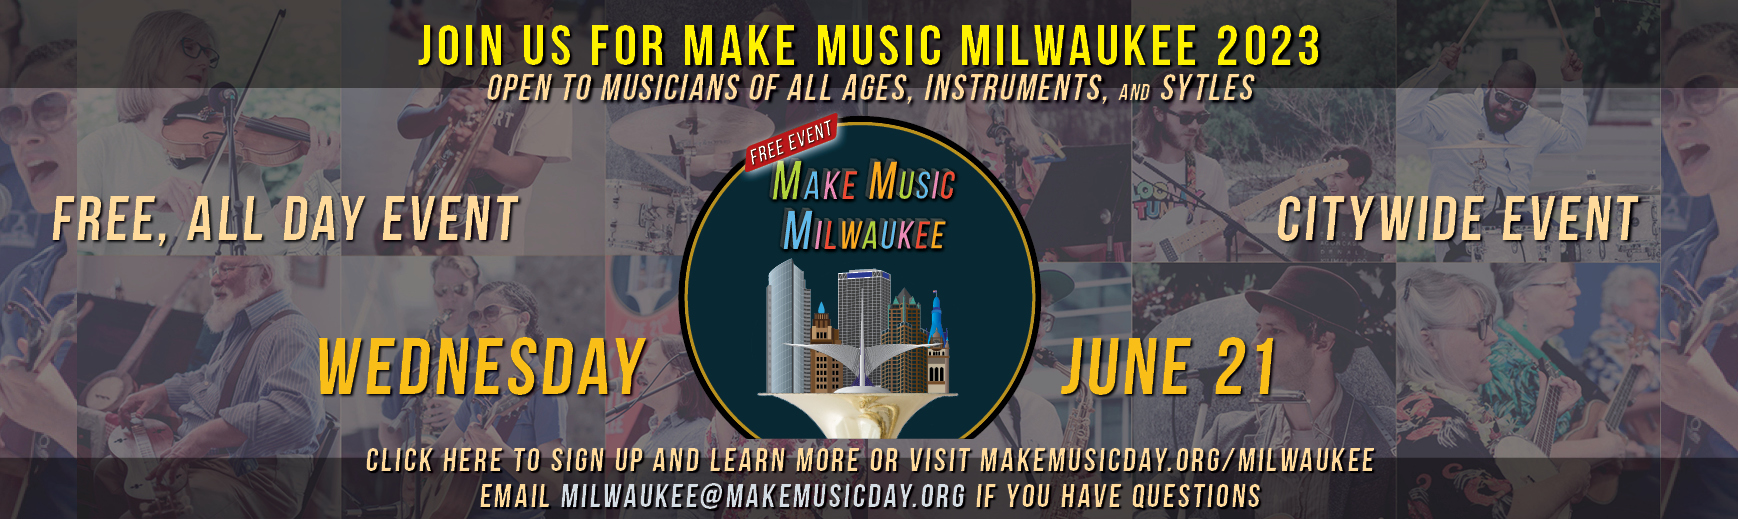 An all-day, city and worldwide celebration of music on the longest day of the year, June 21st, the summer solstice! Open to musicians of all ages, instruments, and styles. Click here to register to perform, host, or just find local performances happening near you!